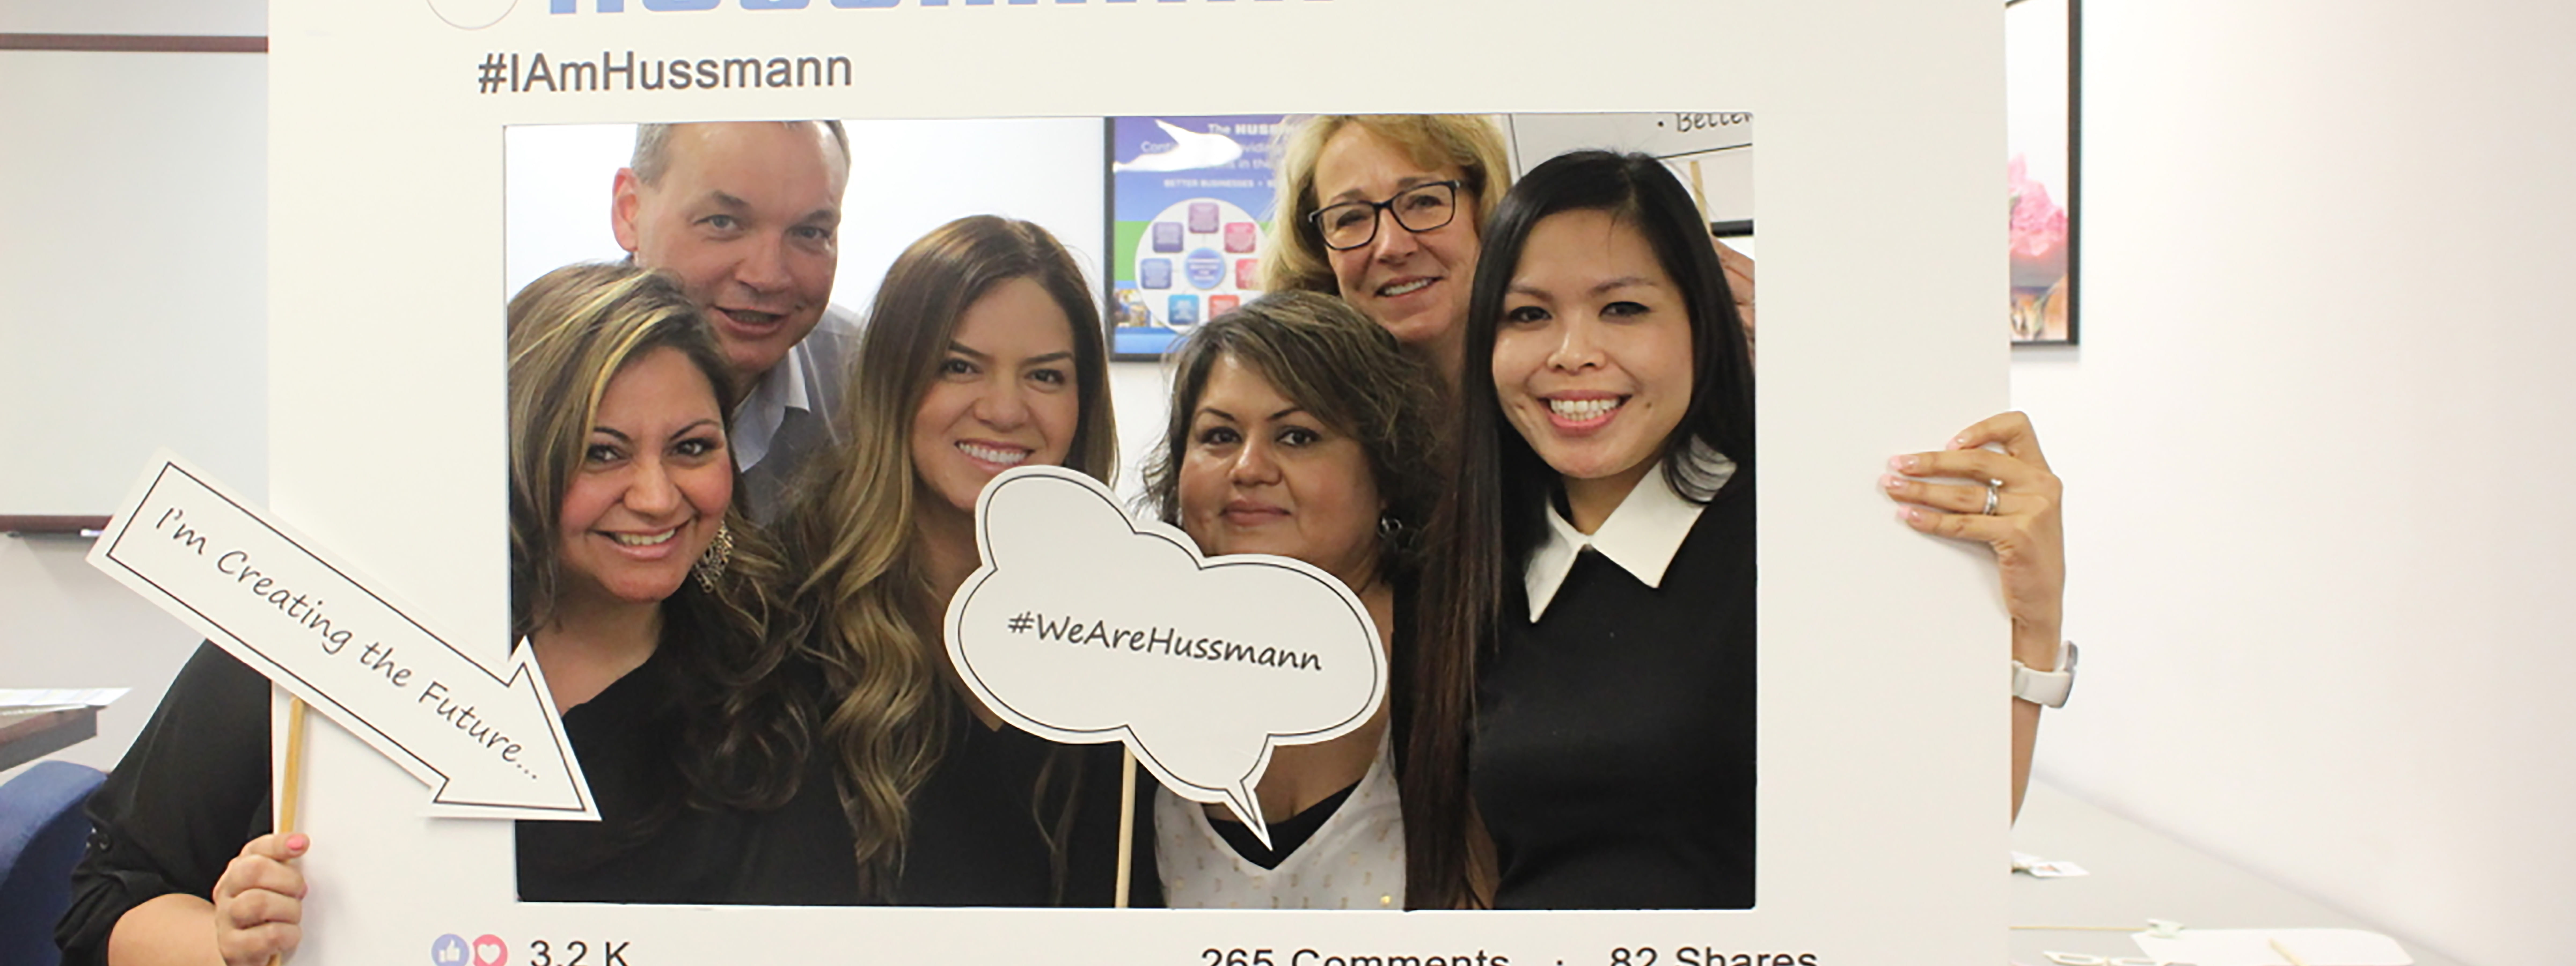 Hussmann employees smiling for photo and holding signs that say #iamhussmann and #wearehussman